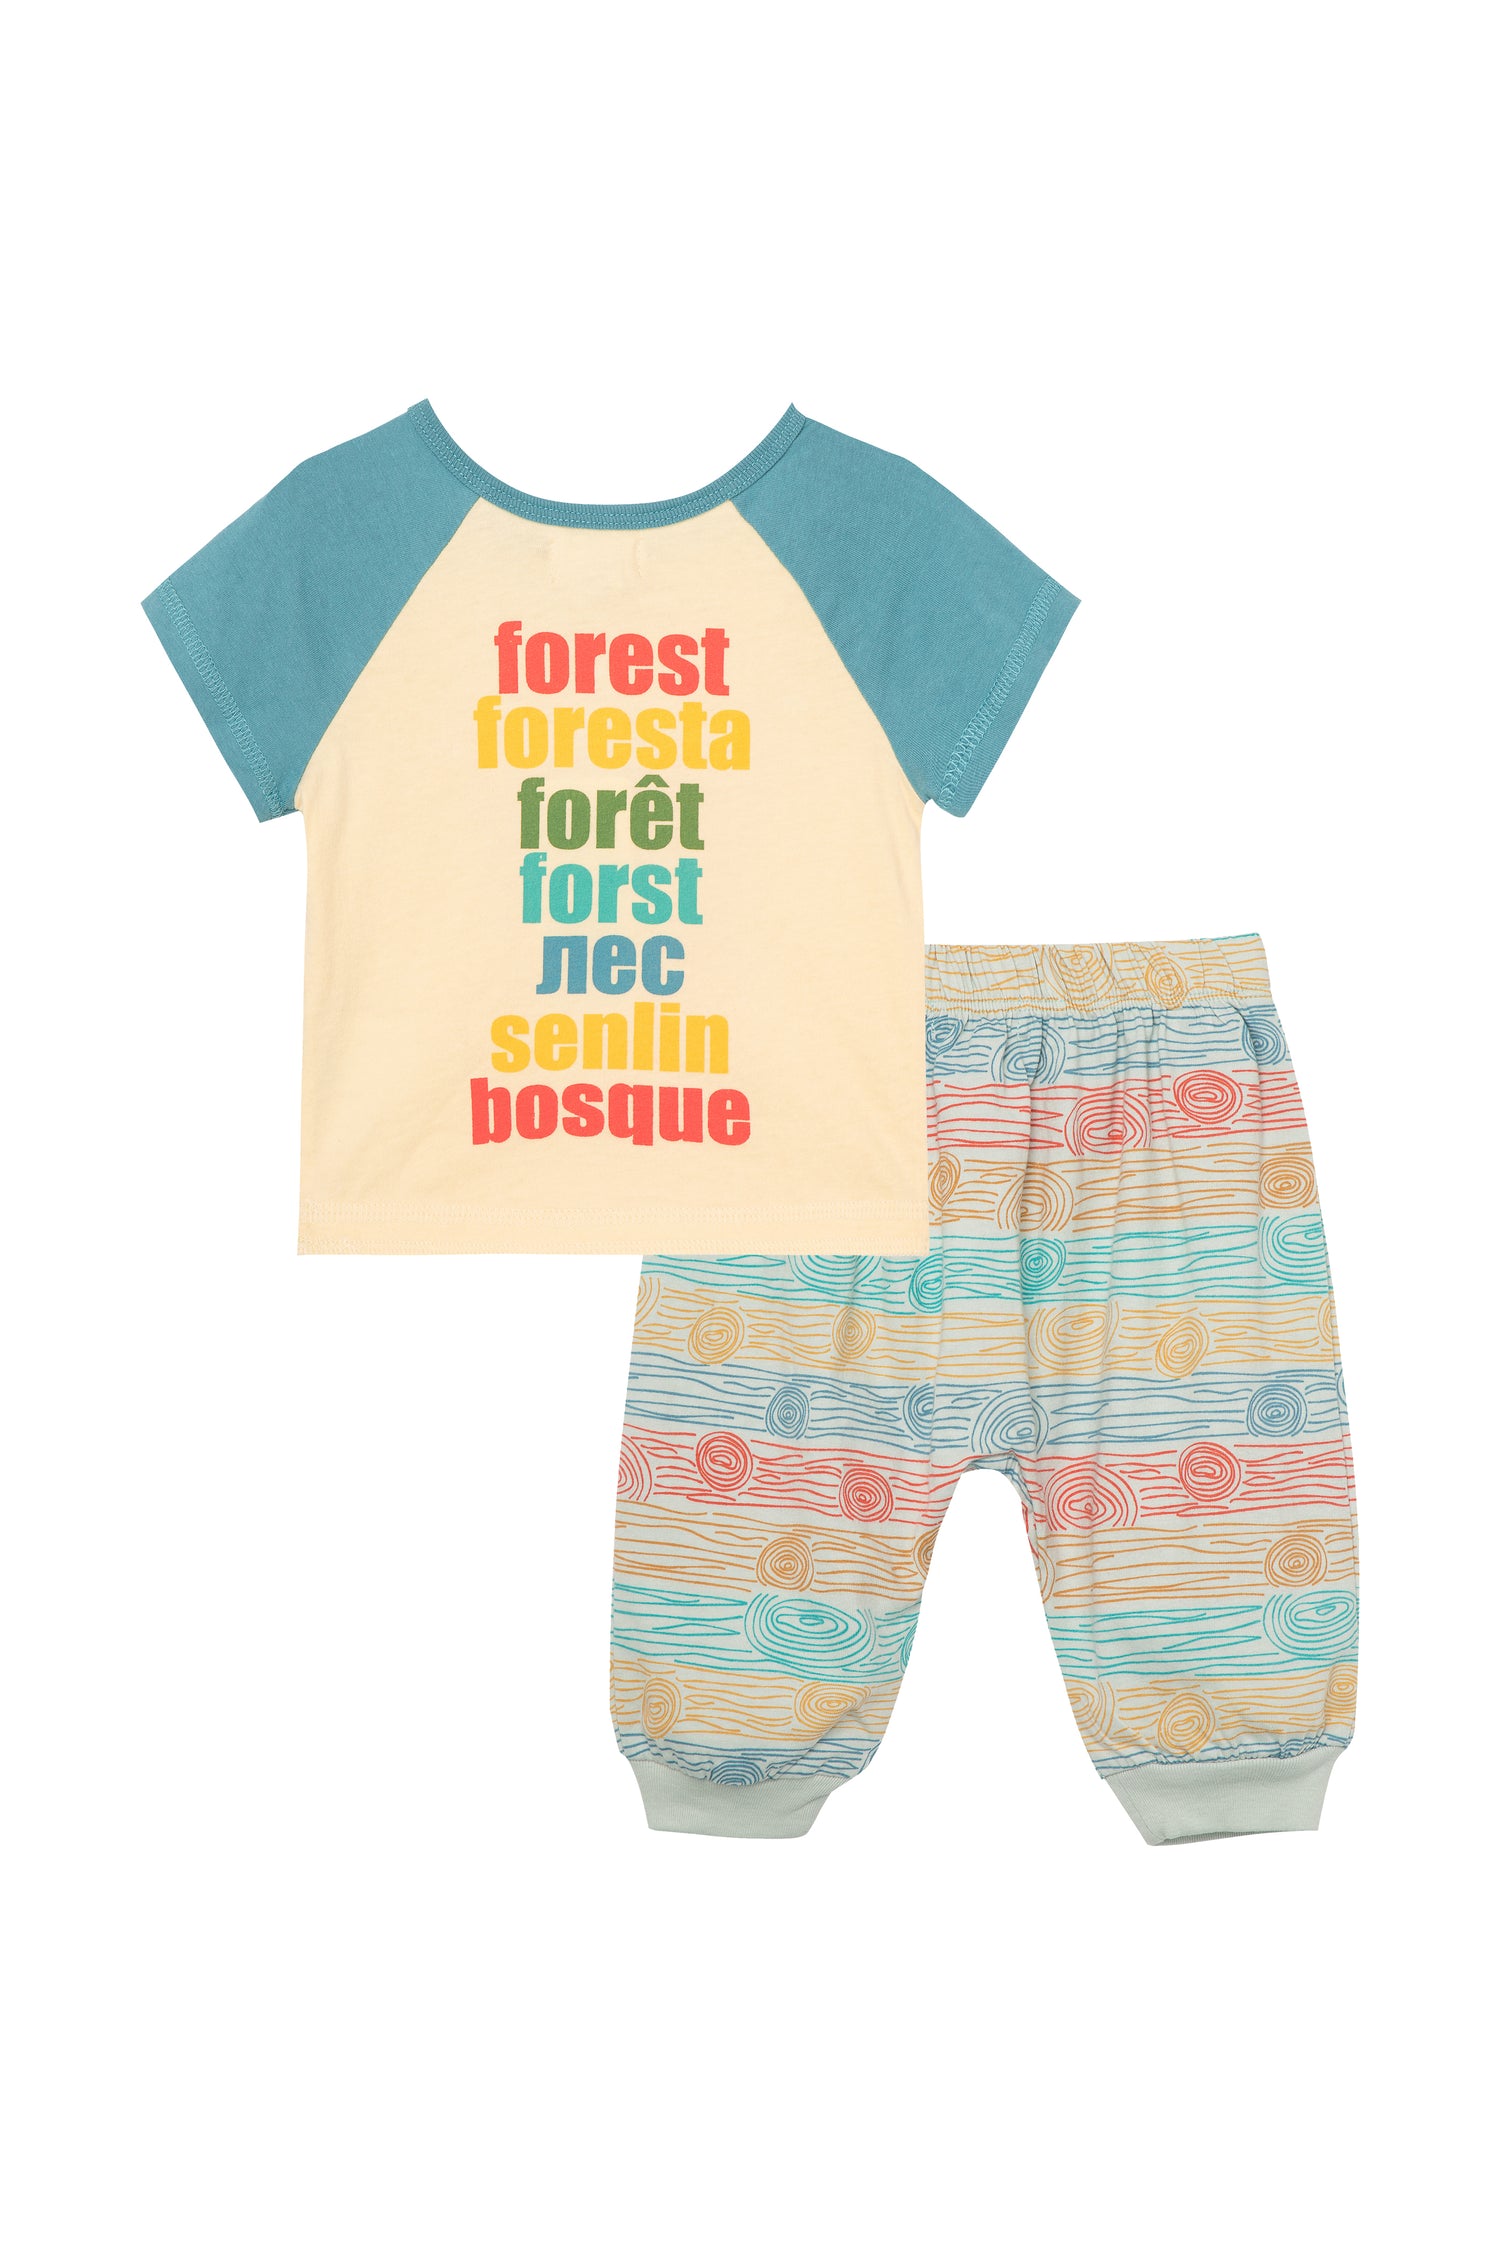 Back of t-shirt and sweatpants set with "forest" text in multiple languages